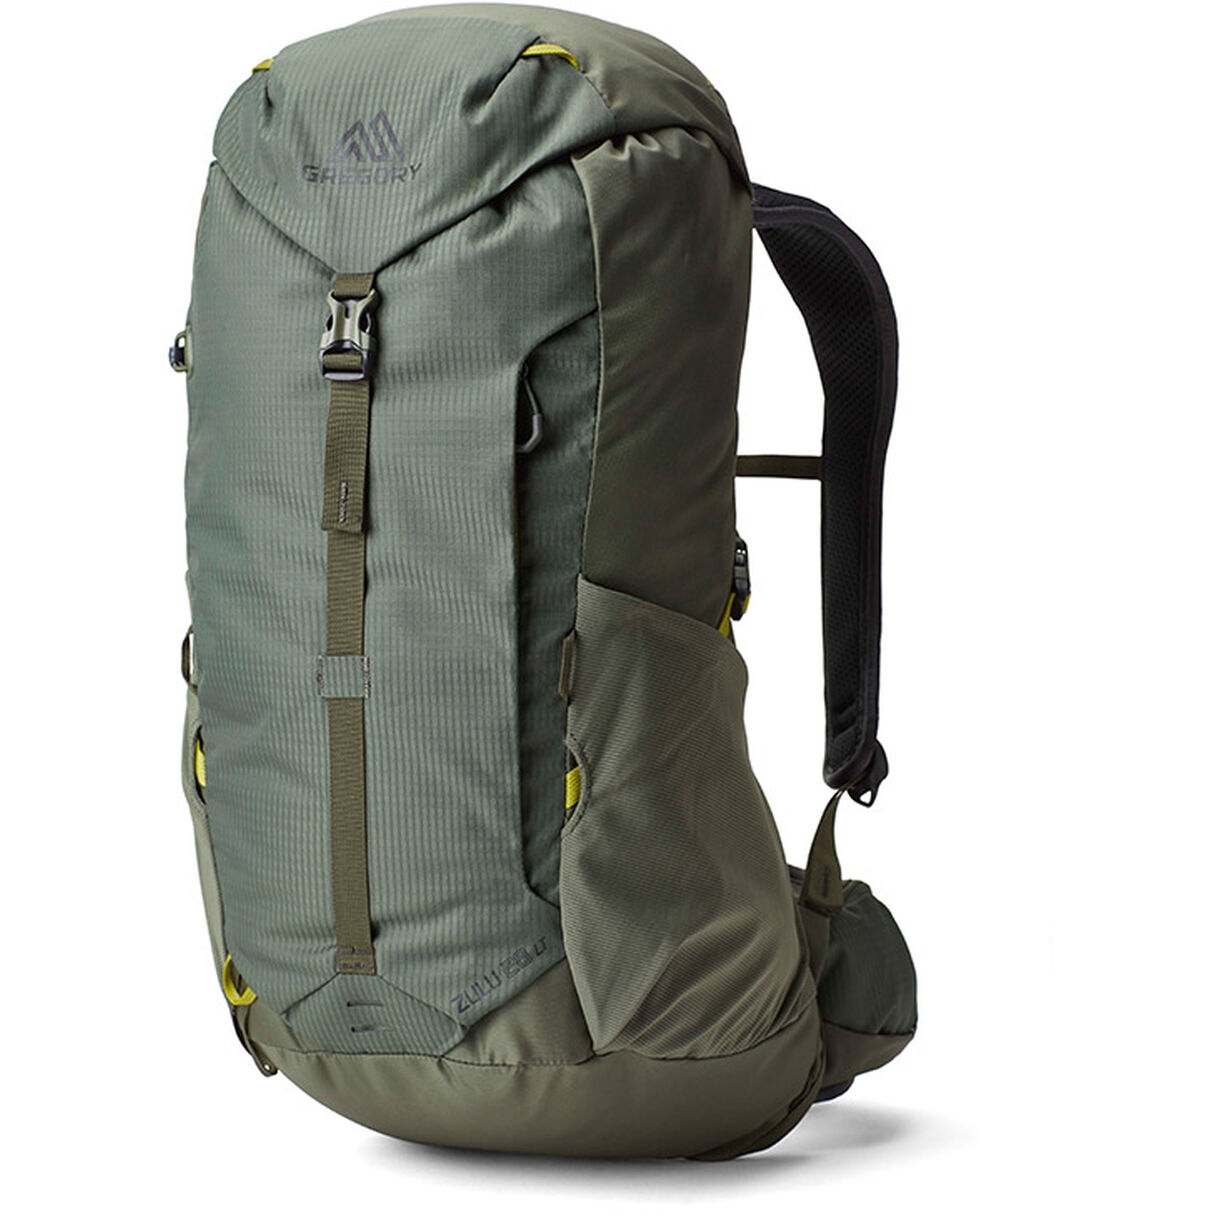 Picture of Gregory Zulu LT 28 Backpack - Forage Green